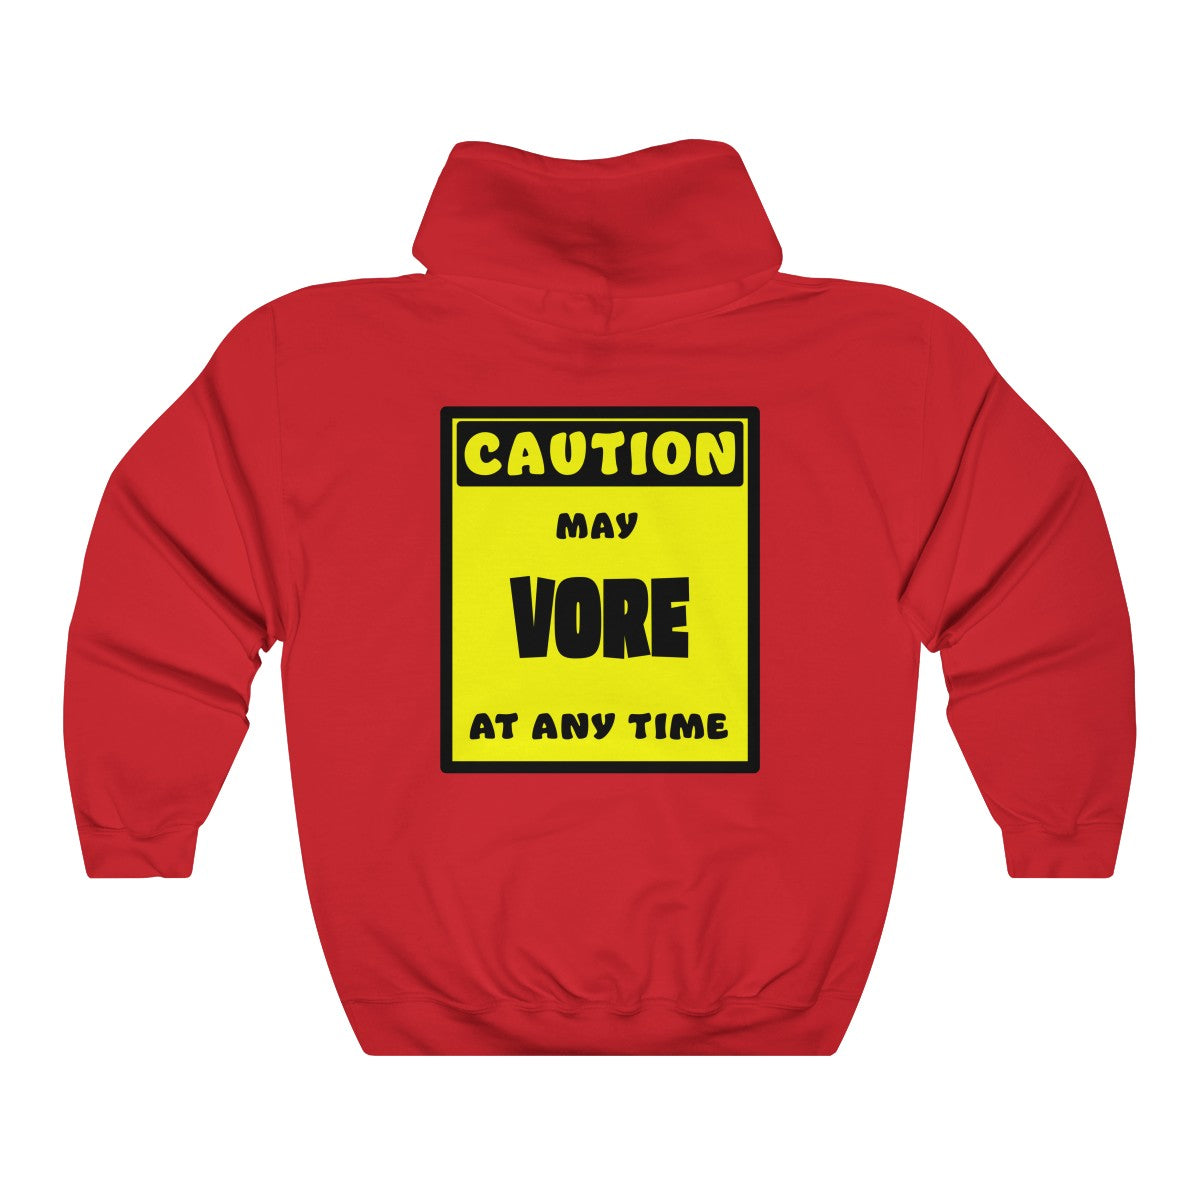 CAUTION! May VORE at any time! - Hoodie Hoodie AFLT-Whootorca Red S 